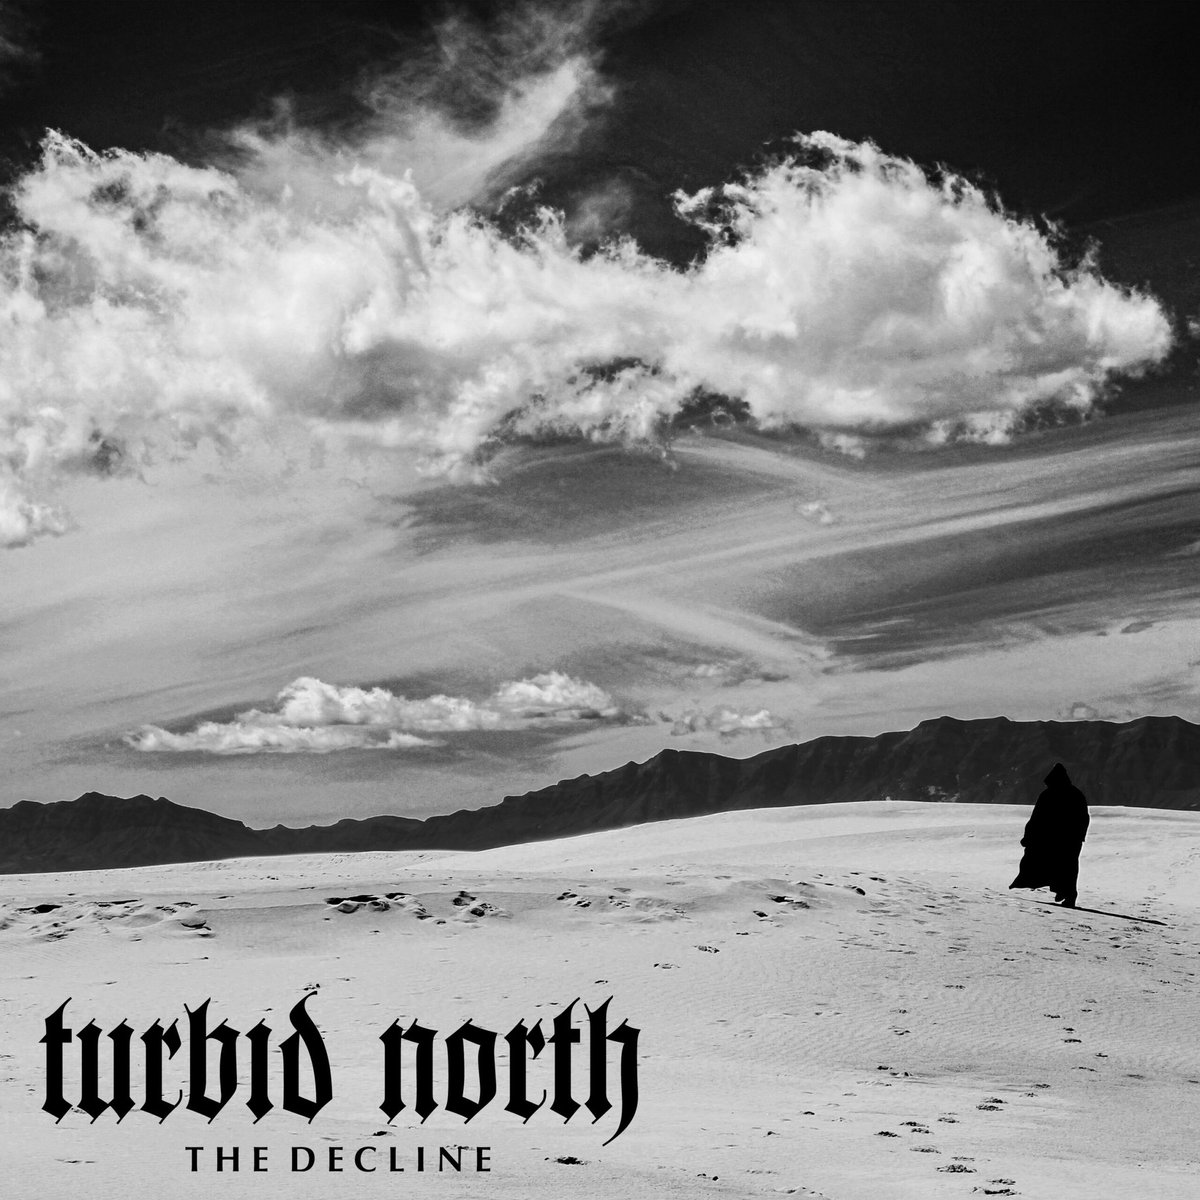 #AlbumOfTheWeek
@turbidnorth -The Decline

Had to do 2 AOTWs this week because this just f*%king thunders! This is all the more impressive given how much it moves around musically.  Doomy, groovy,grungy,punishing and melodic.